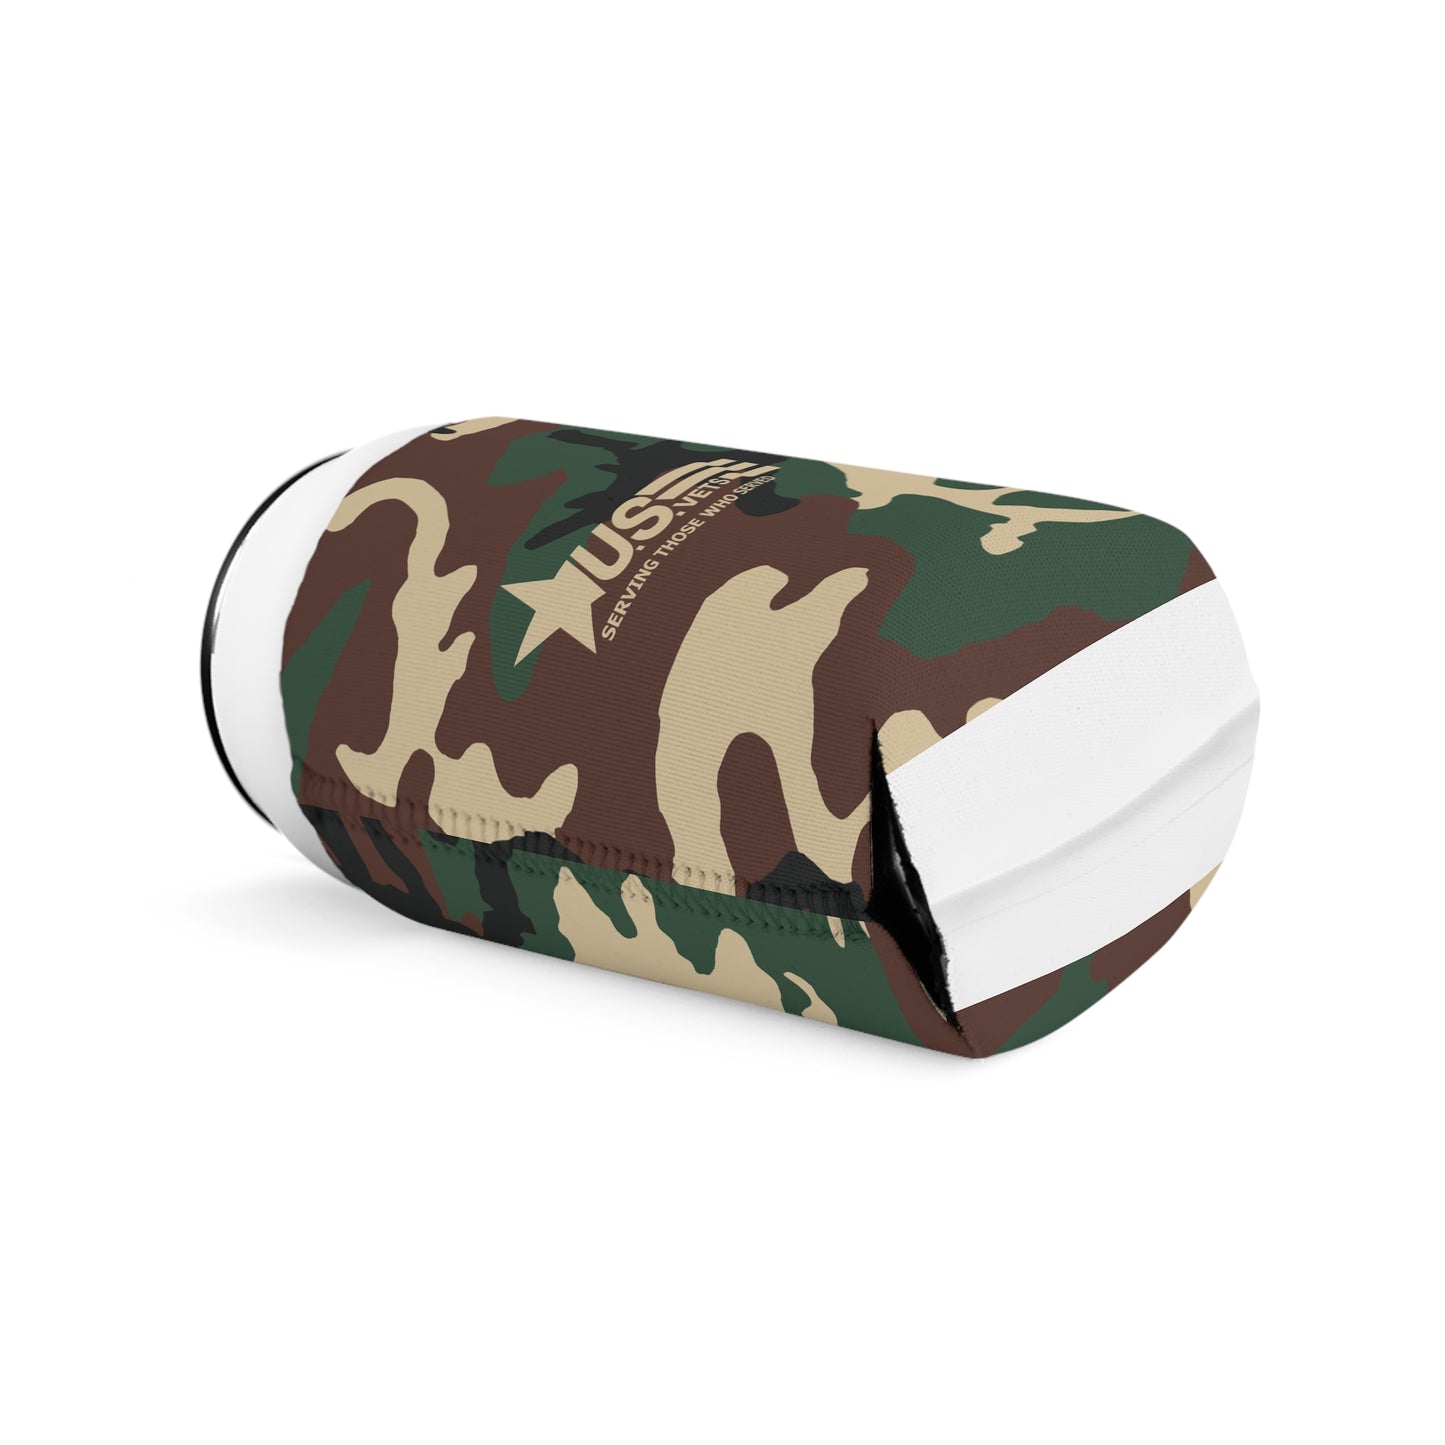 U.S.VETS Can Cooler Sleeve